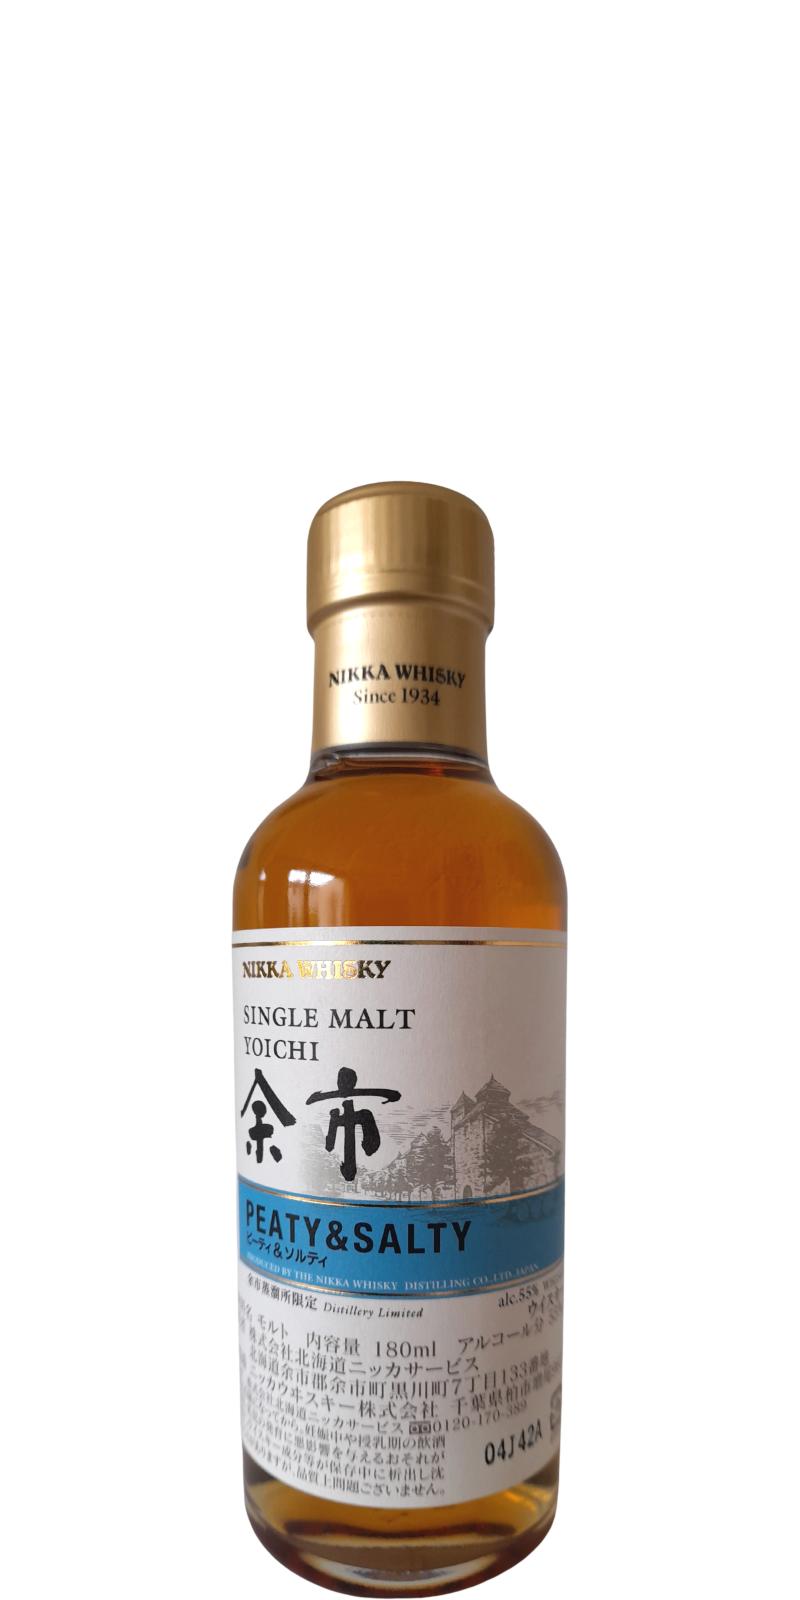 Yoichi Peaty & Salty - Value and price information - Whiskystats